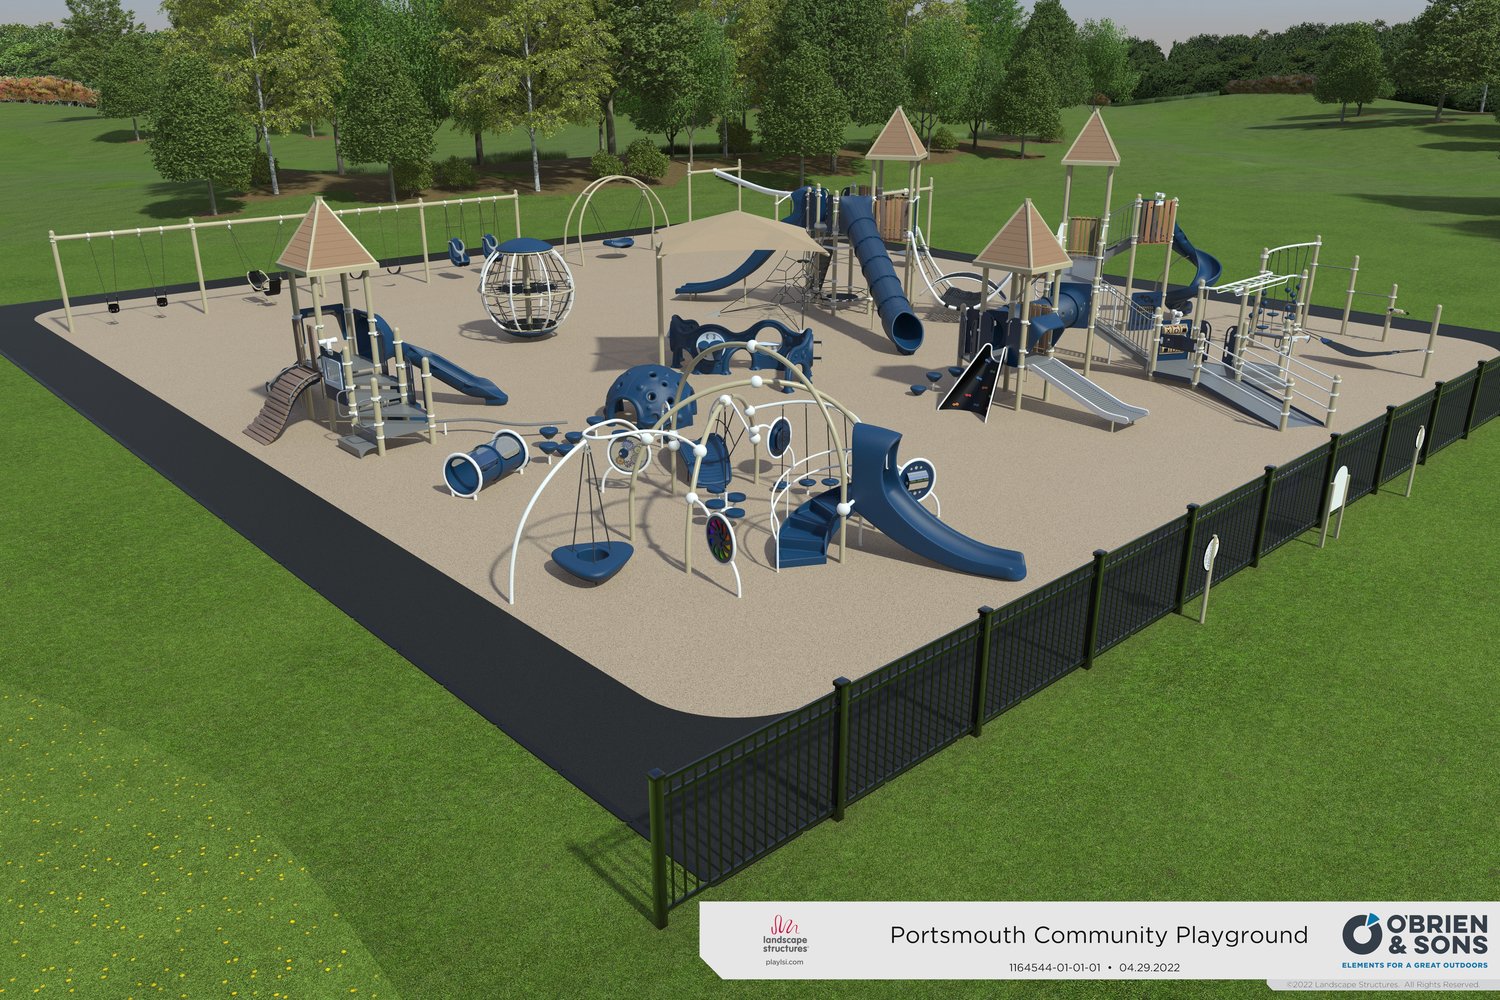 A three-dimensional rendering of how the new Turnpike Avenue playground would appear if built.